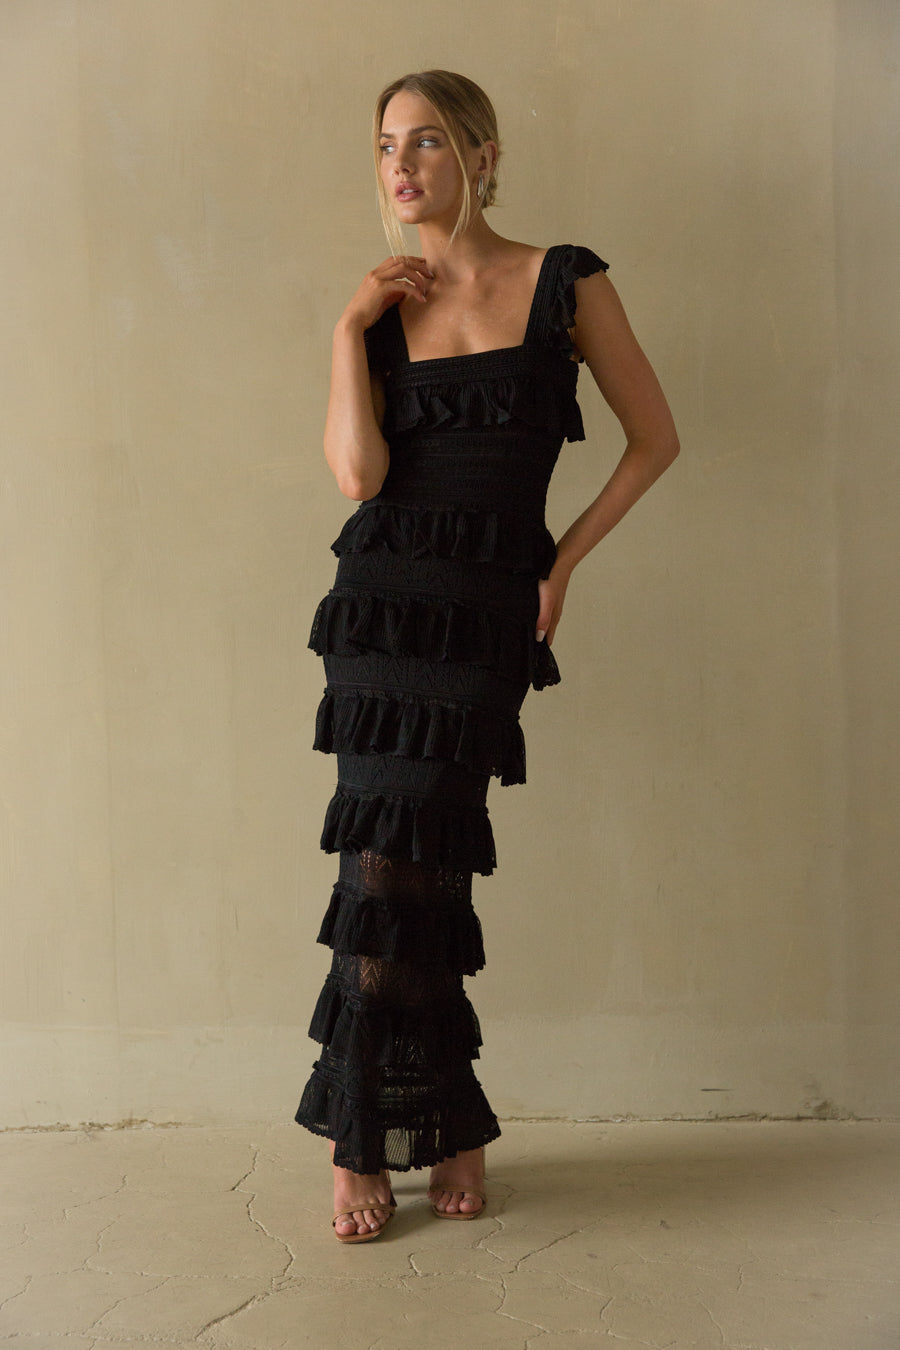 Front view | Black Tiered Ruffle Cochet Maxi dress | Day trip dress